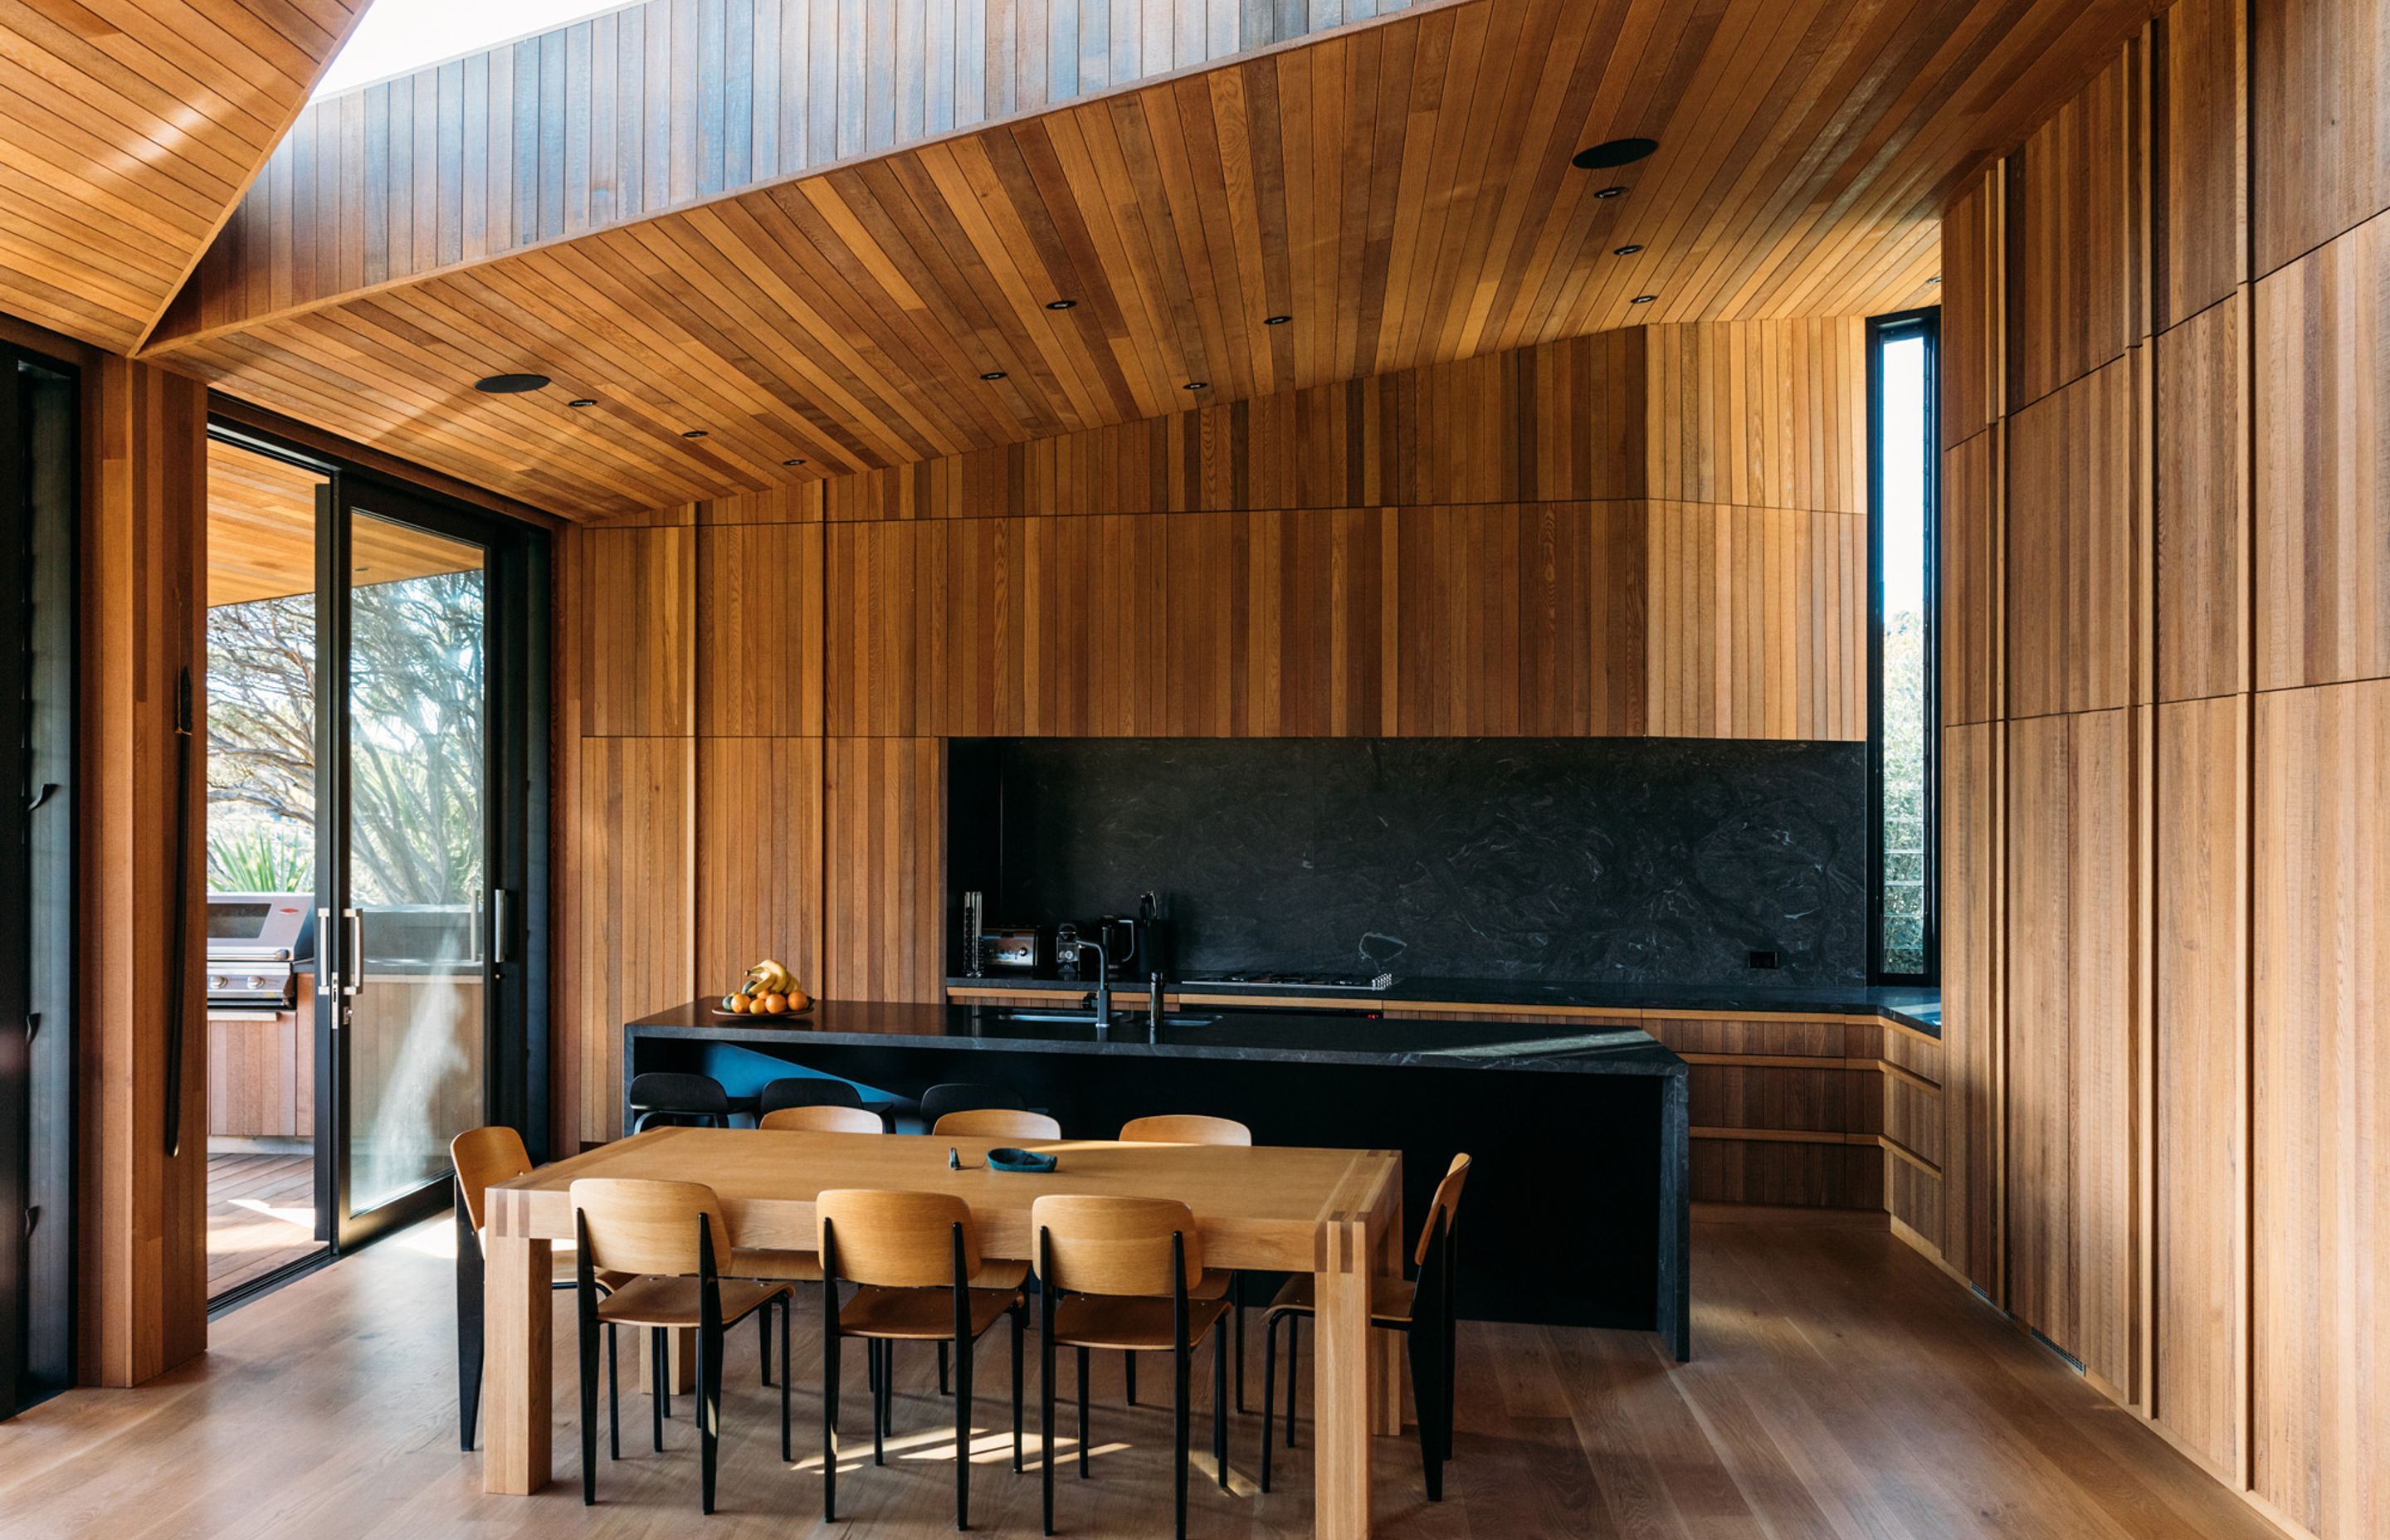 Integrated appliances and cabinetry, coupled with the black of the granite, helps the kitchen recede into the background of the open-plan living area.